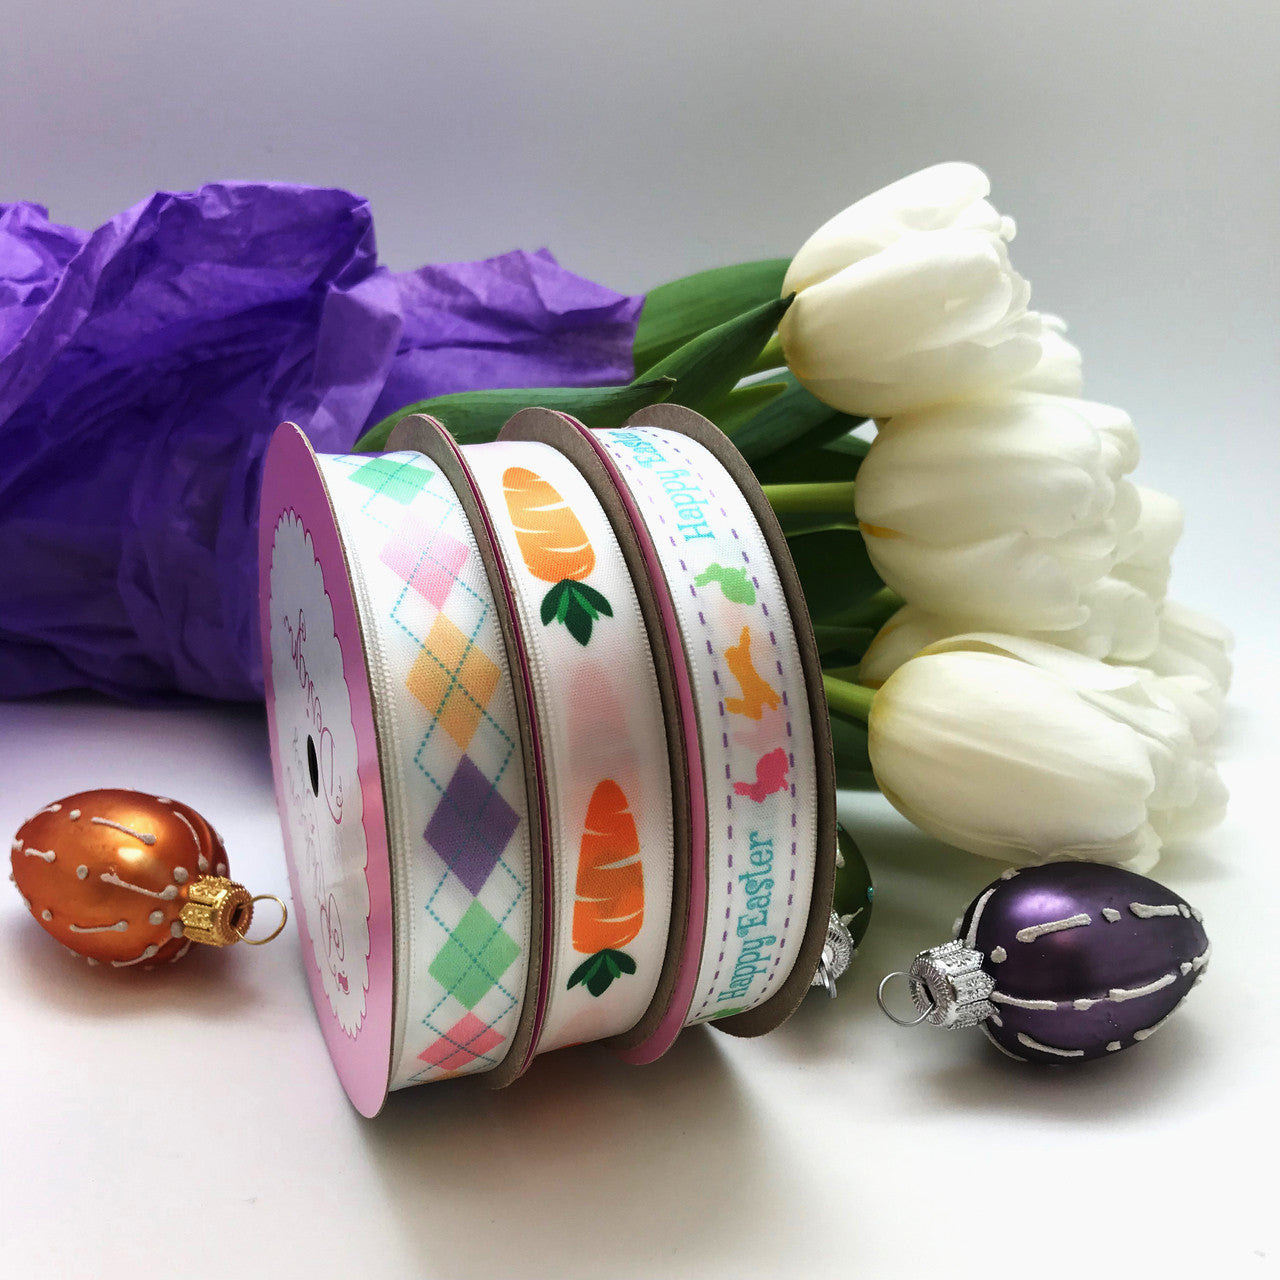 Mix pastel argyle with carrots a row and Happy Easter ribbons to tie on all your Easter baskets and treats!